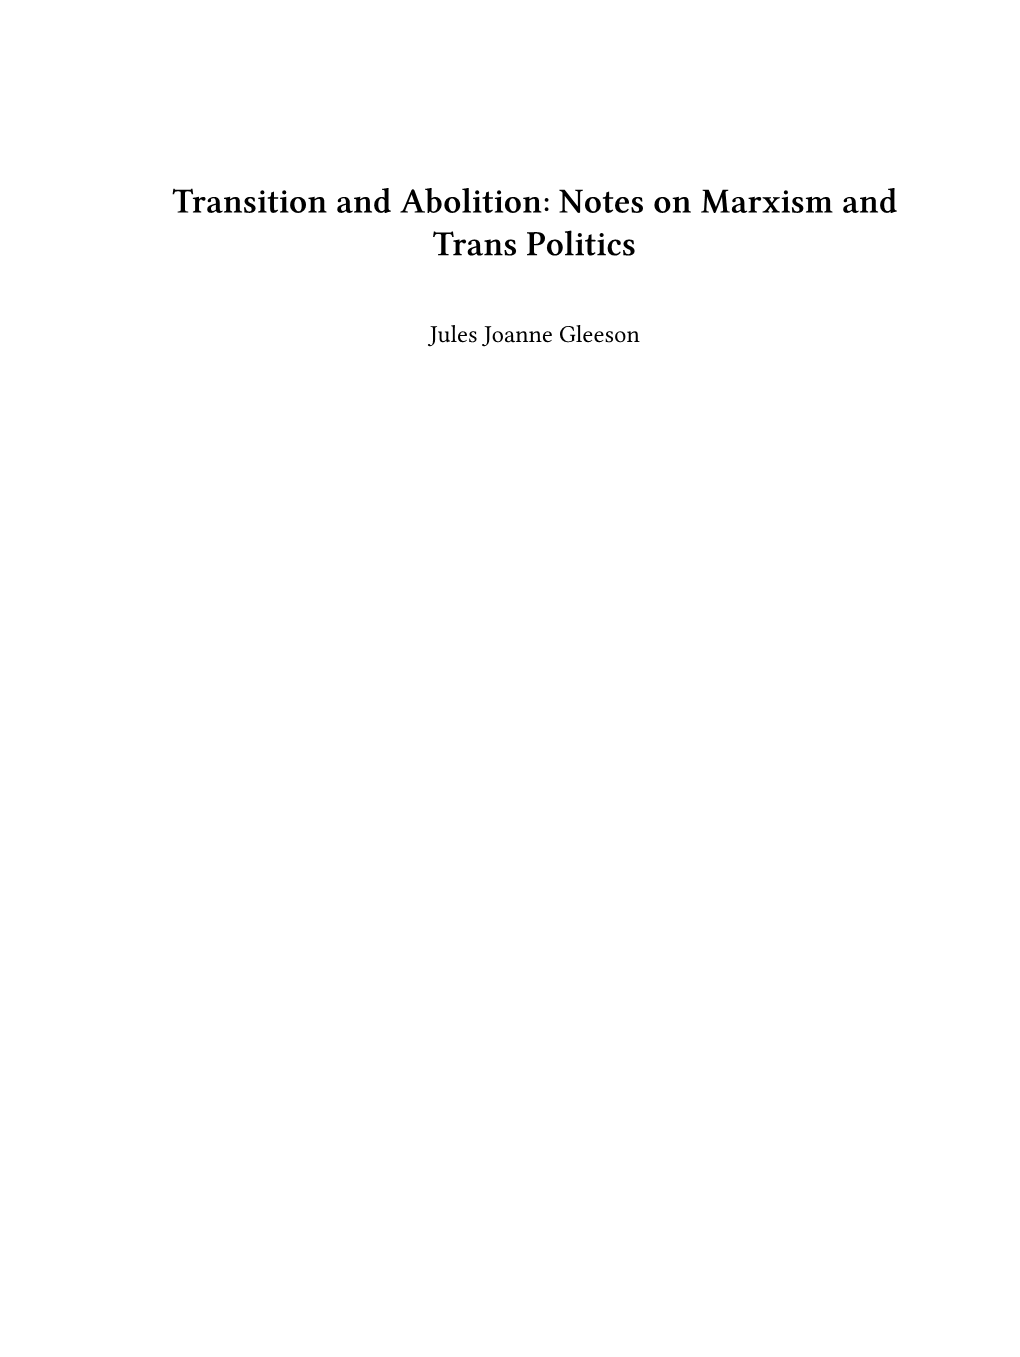 Transition and Abolition: Notes on Marxism and Trans Politics